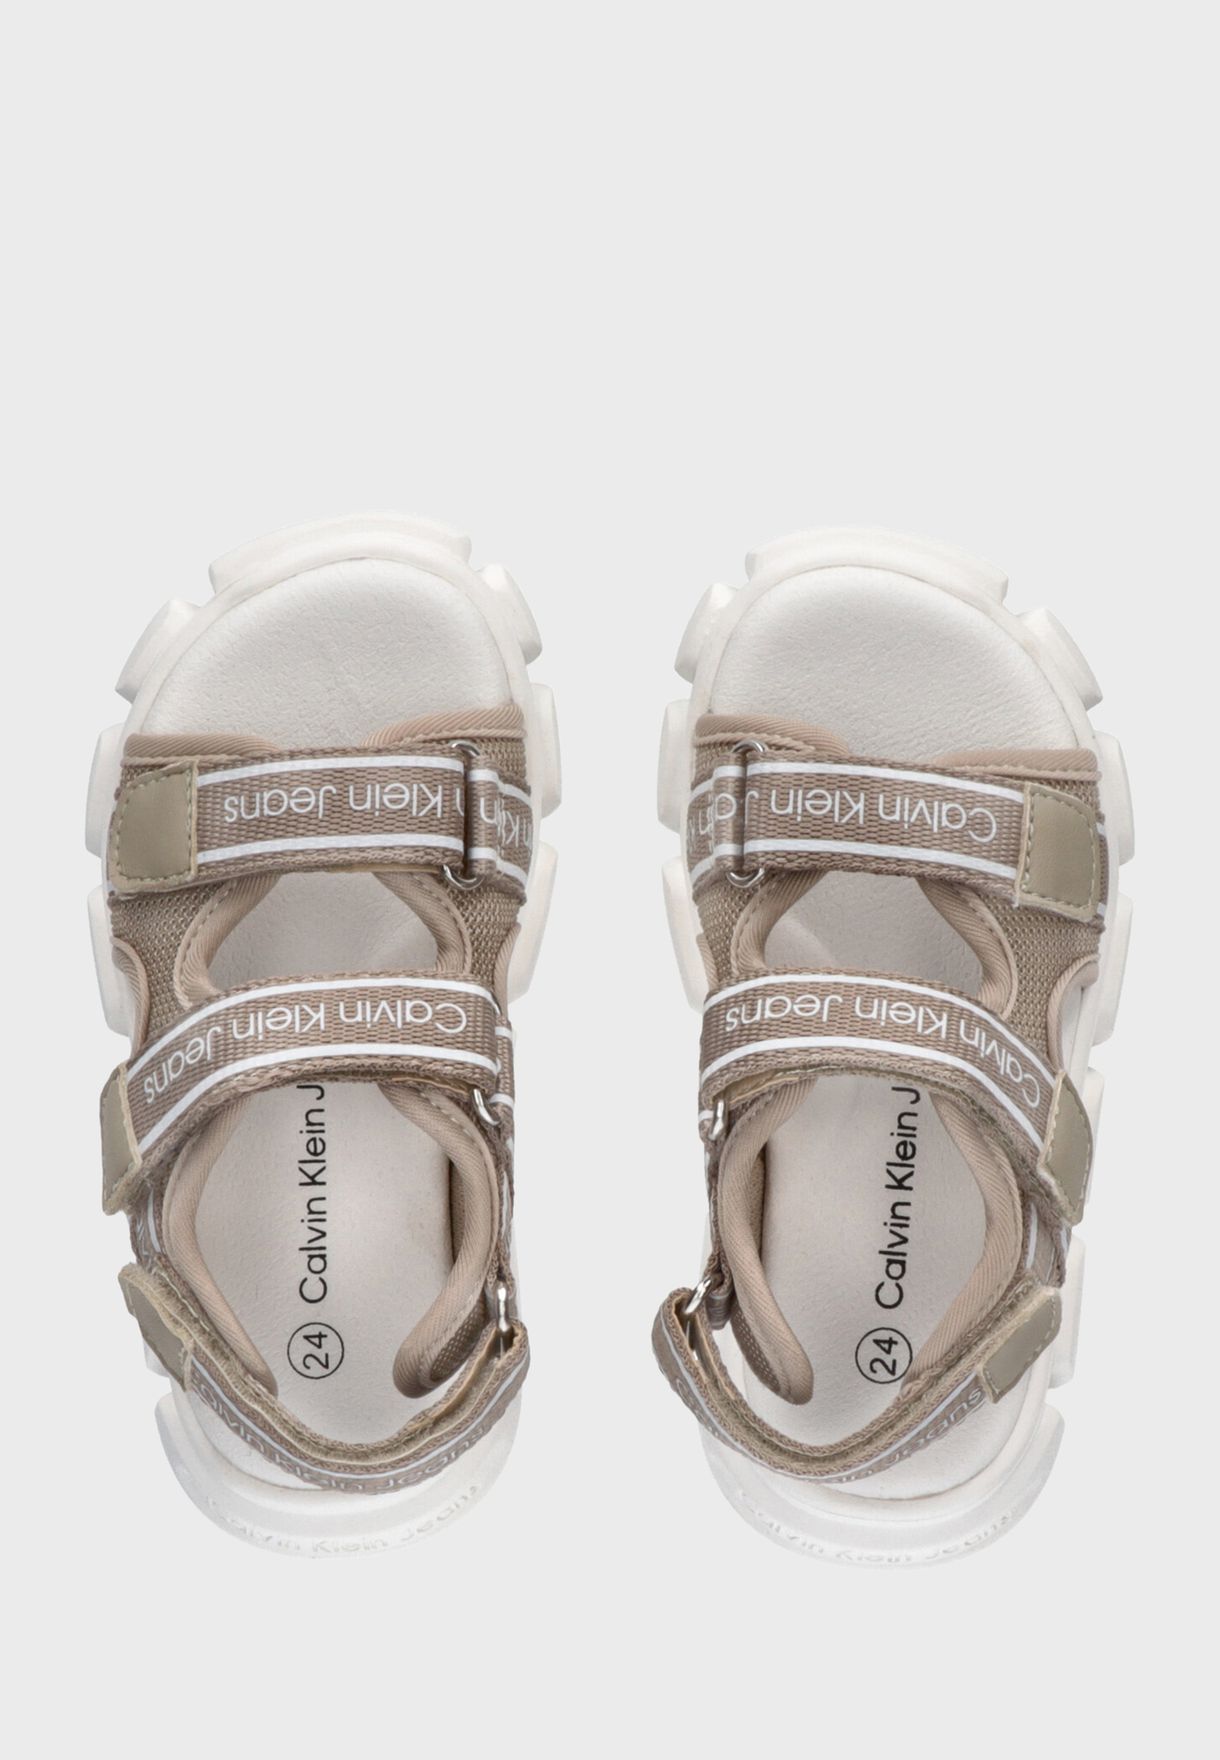 Kids Casual Sandals